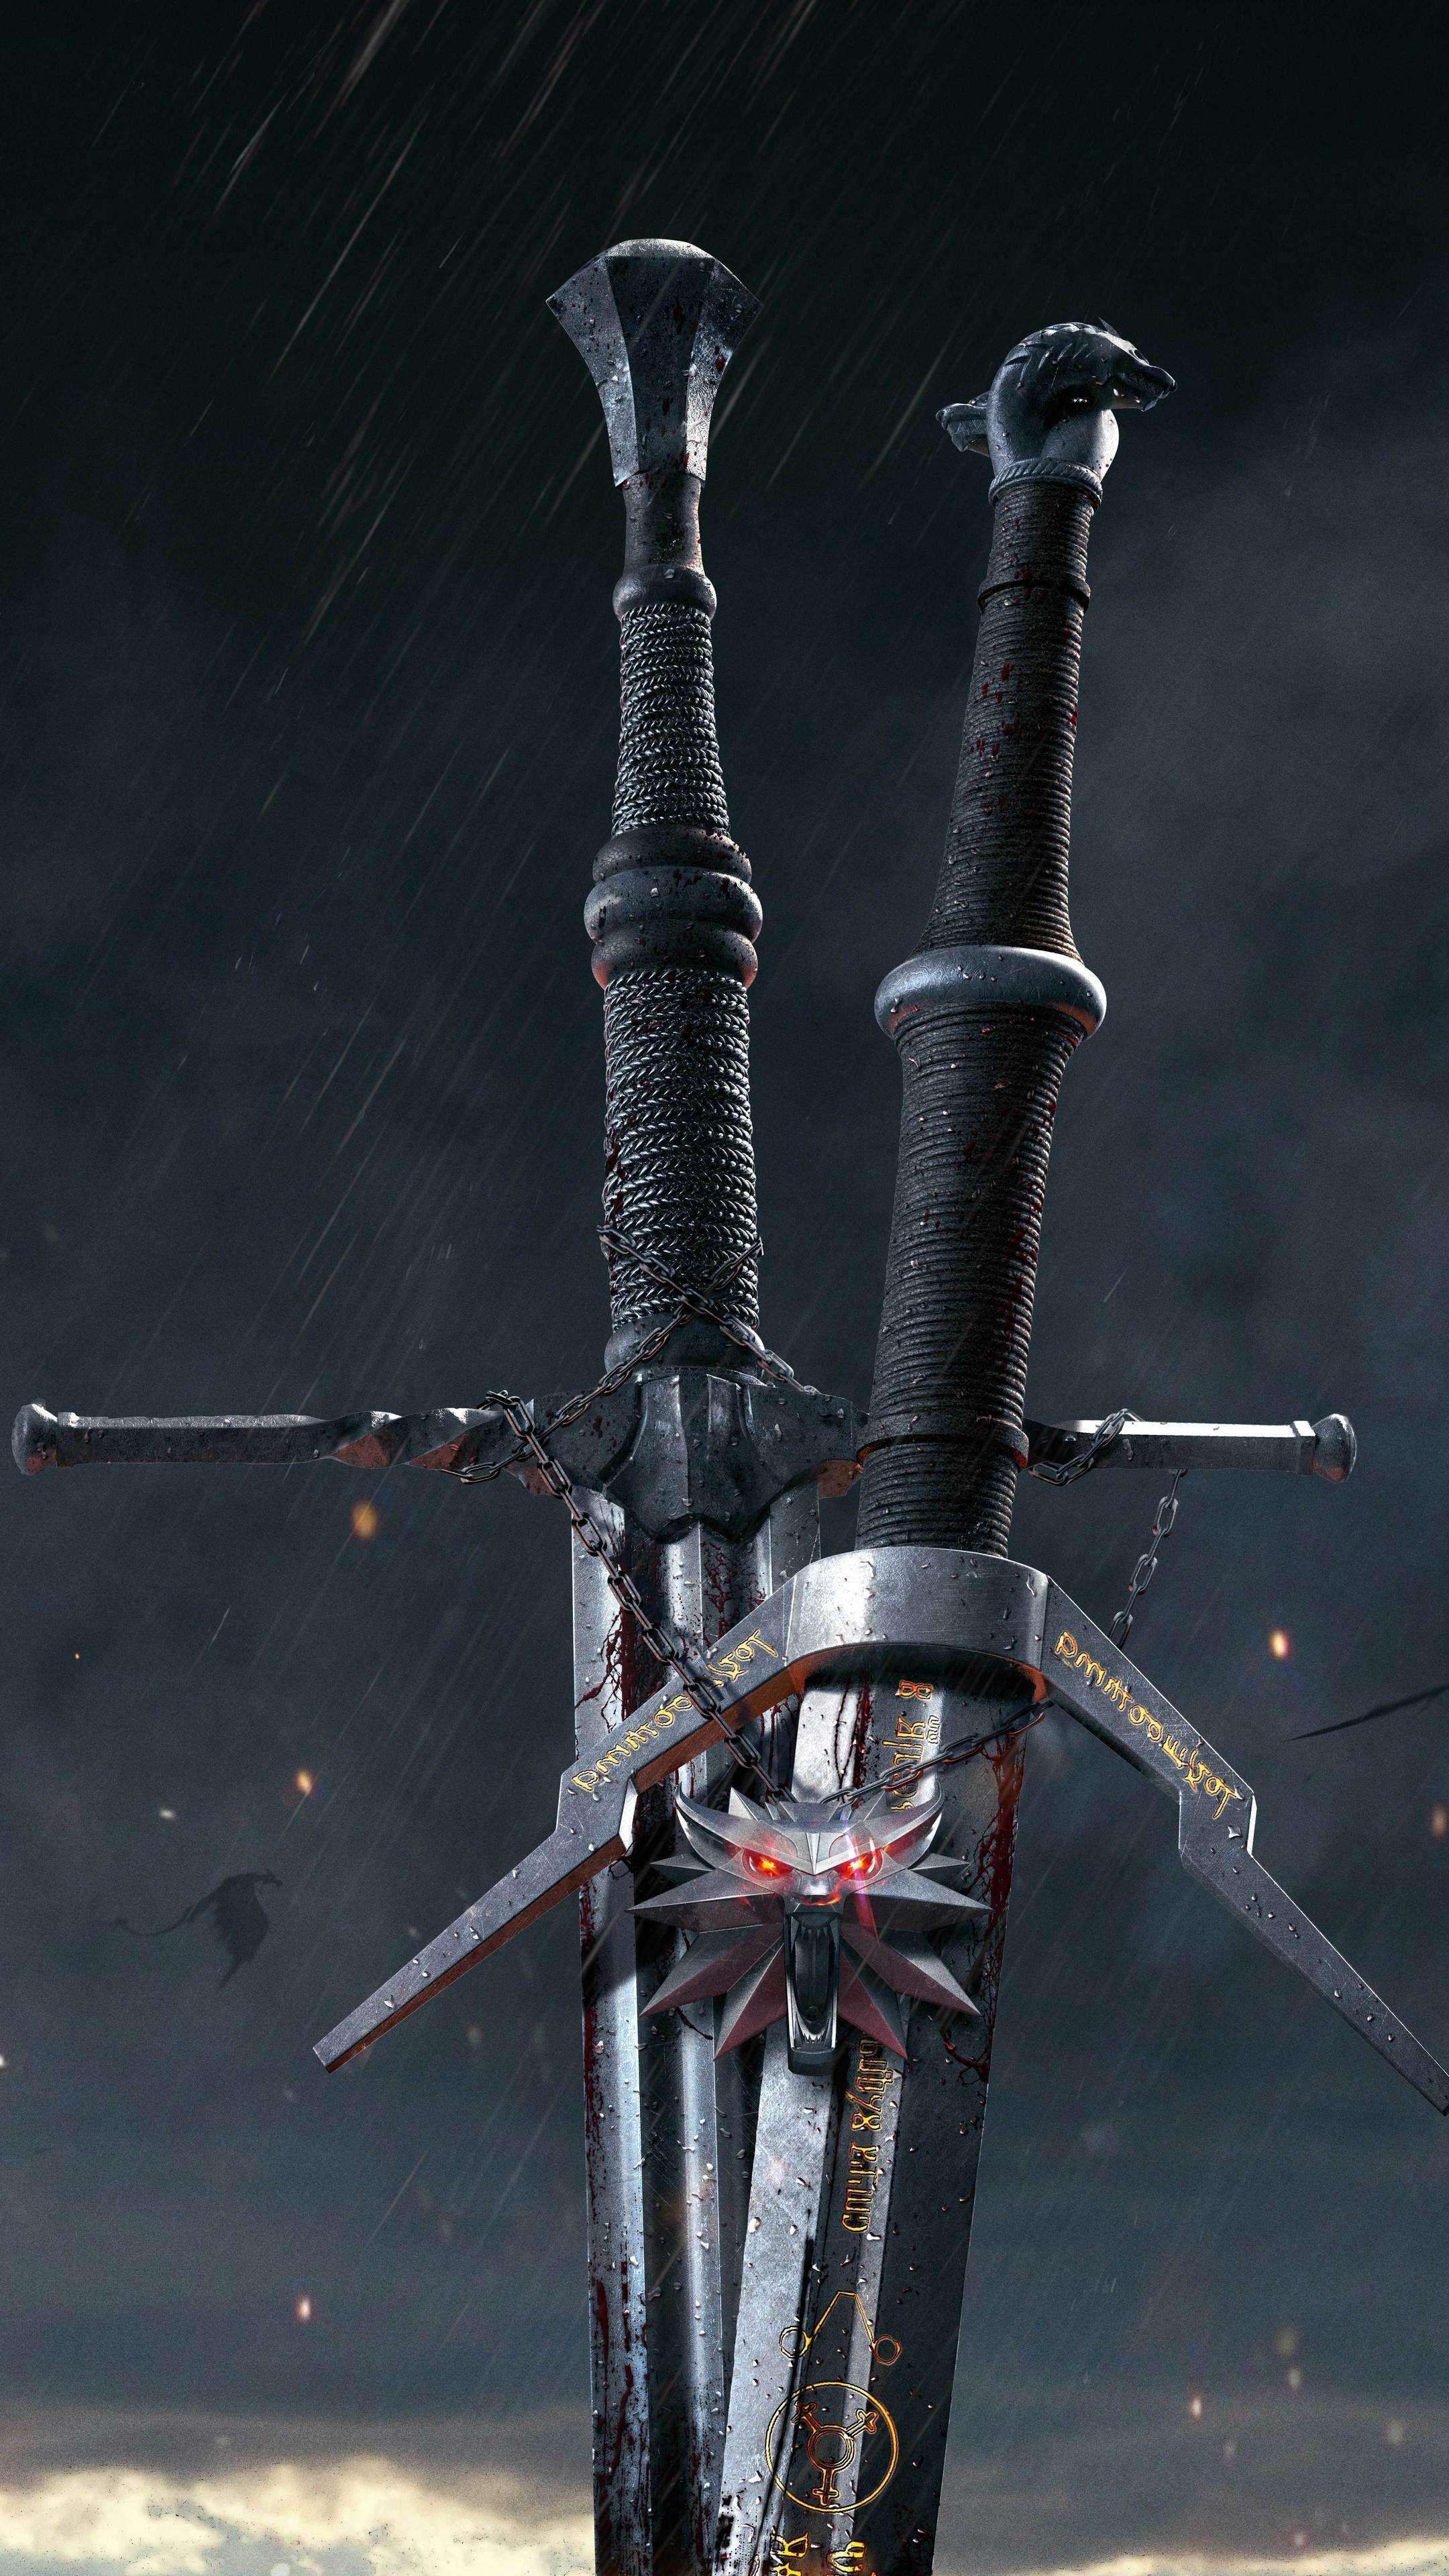 The witcher 3. iPhone Wallpaper em 2019. Witcher wallpaper